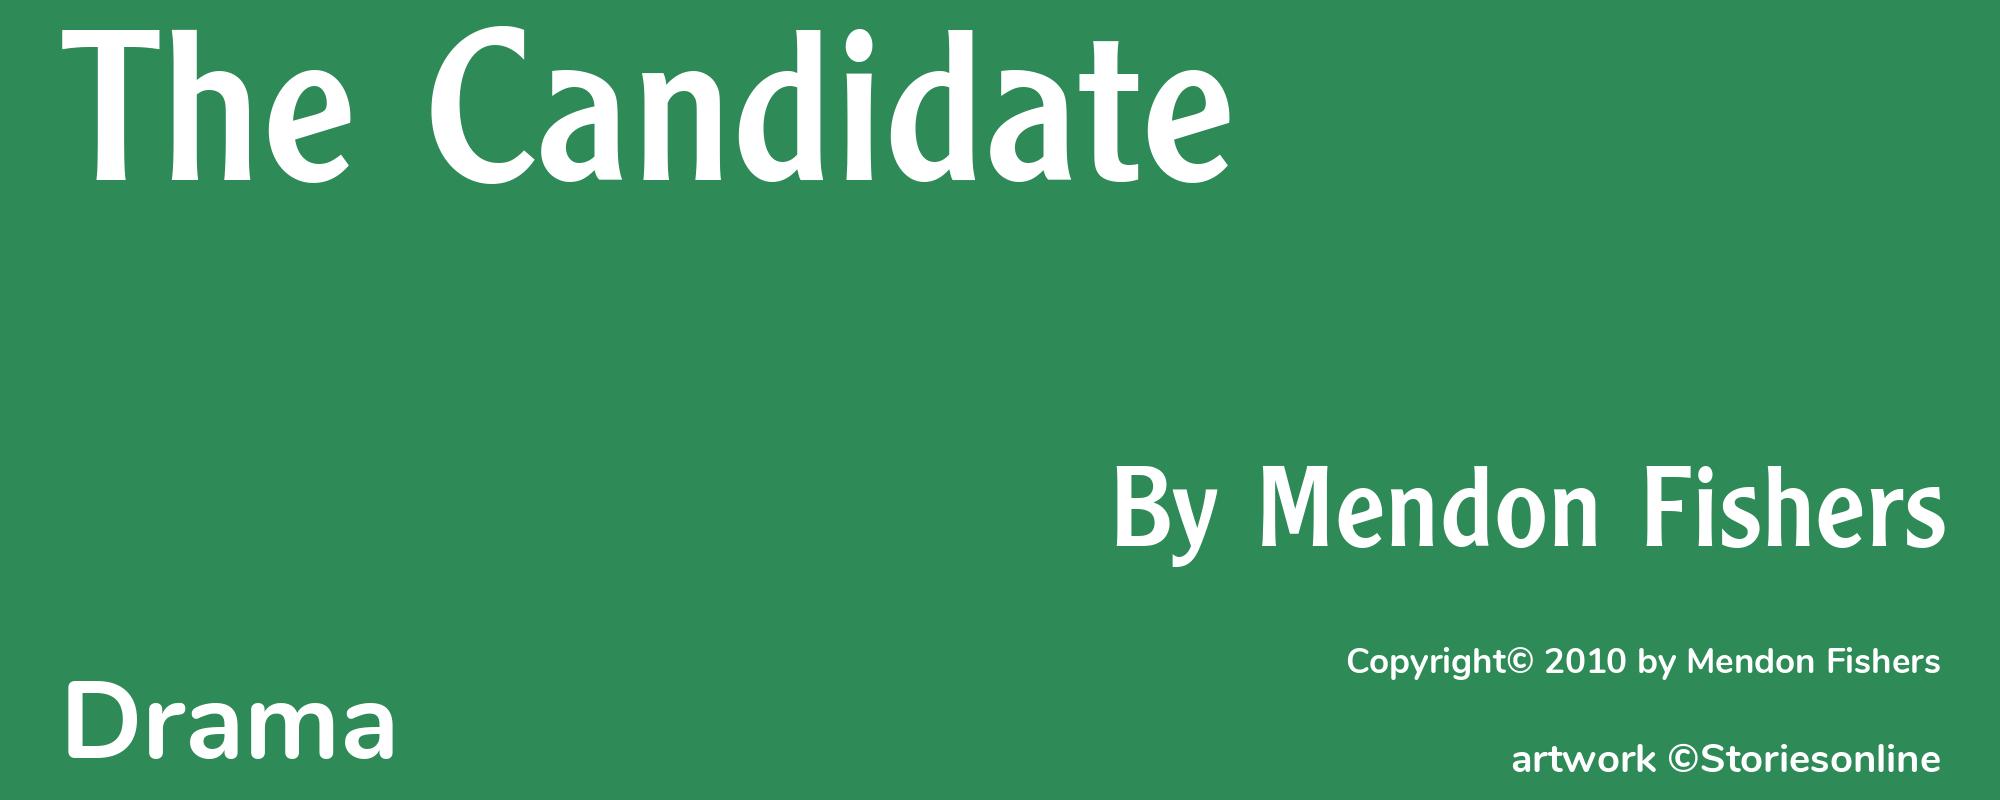 The Candidate - Cover